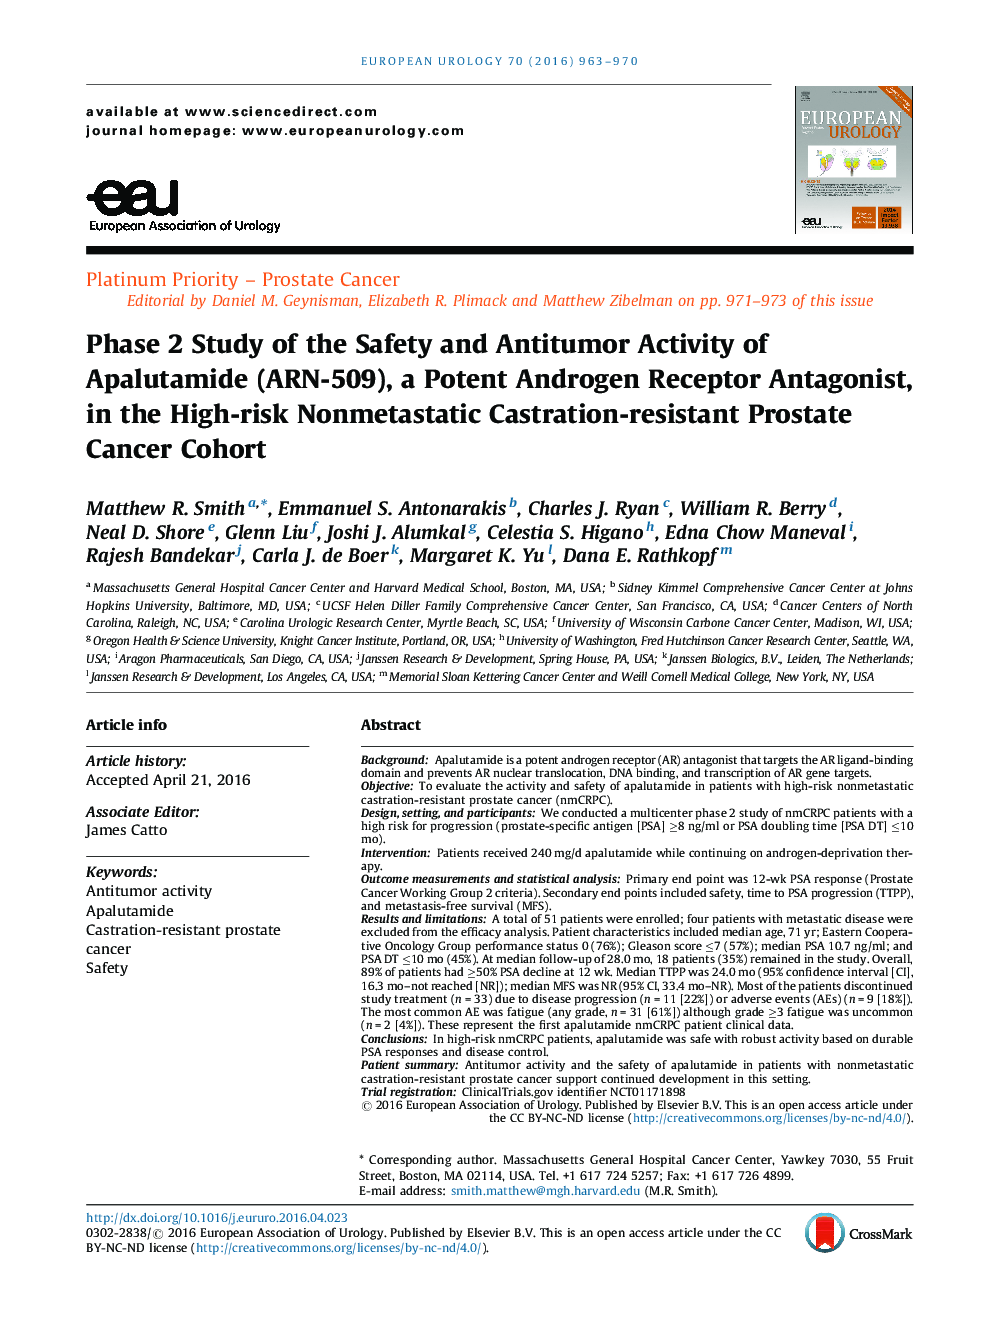 Phase 2 Study of the Safety and Antitumor Activity of Apalutamide (ARN-509), a Potent Androgen Receptor Antagonist, in the High-risk Nonmetastatic Castration-resistant Prostate Cancer Cohort